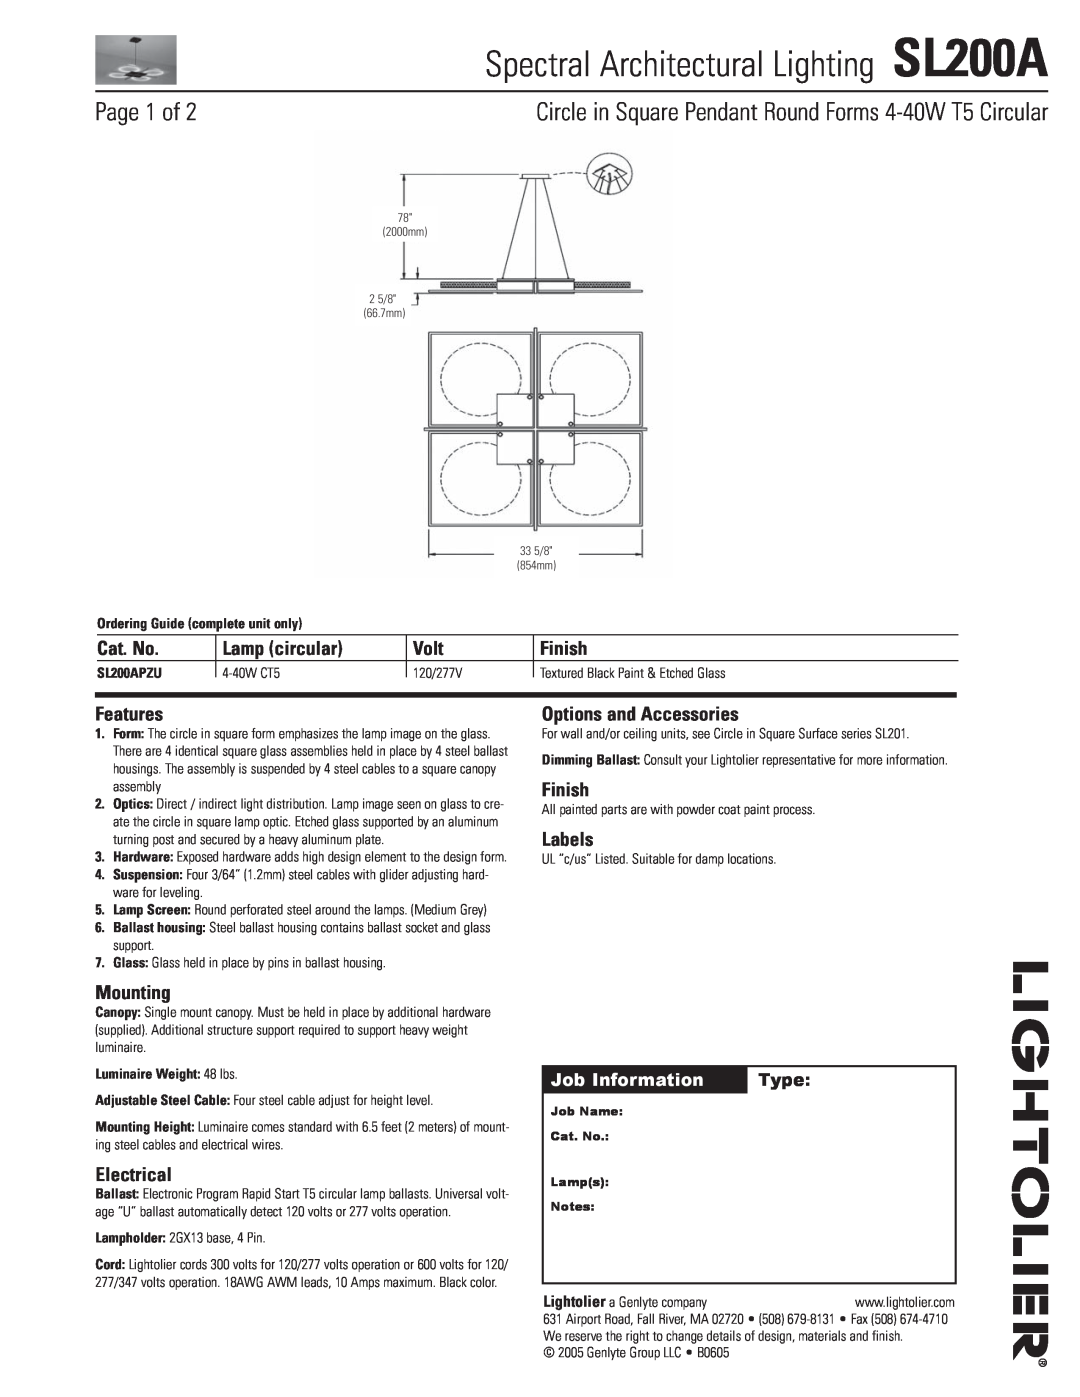 Lightolier manual Spectral Architectural Lighting SL200A, Page 1 of, Cat. No, Lamp circular, Volt, Finish, Features 